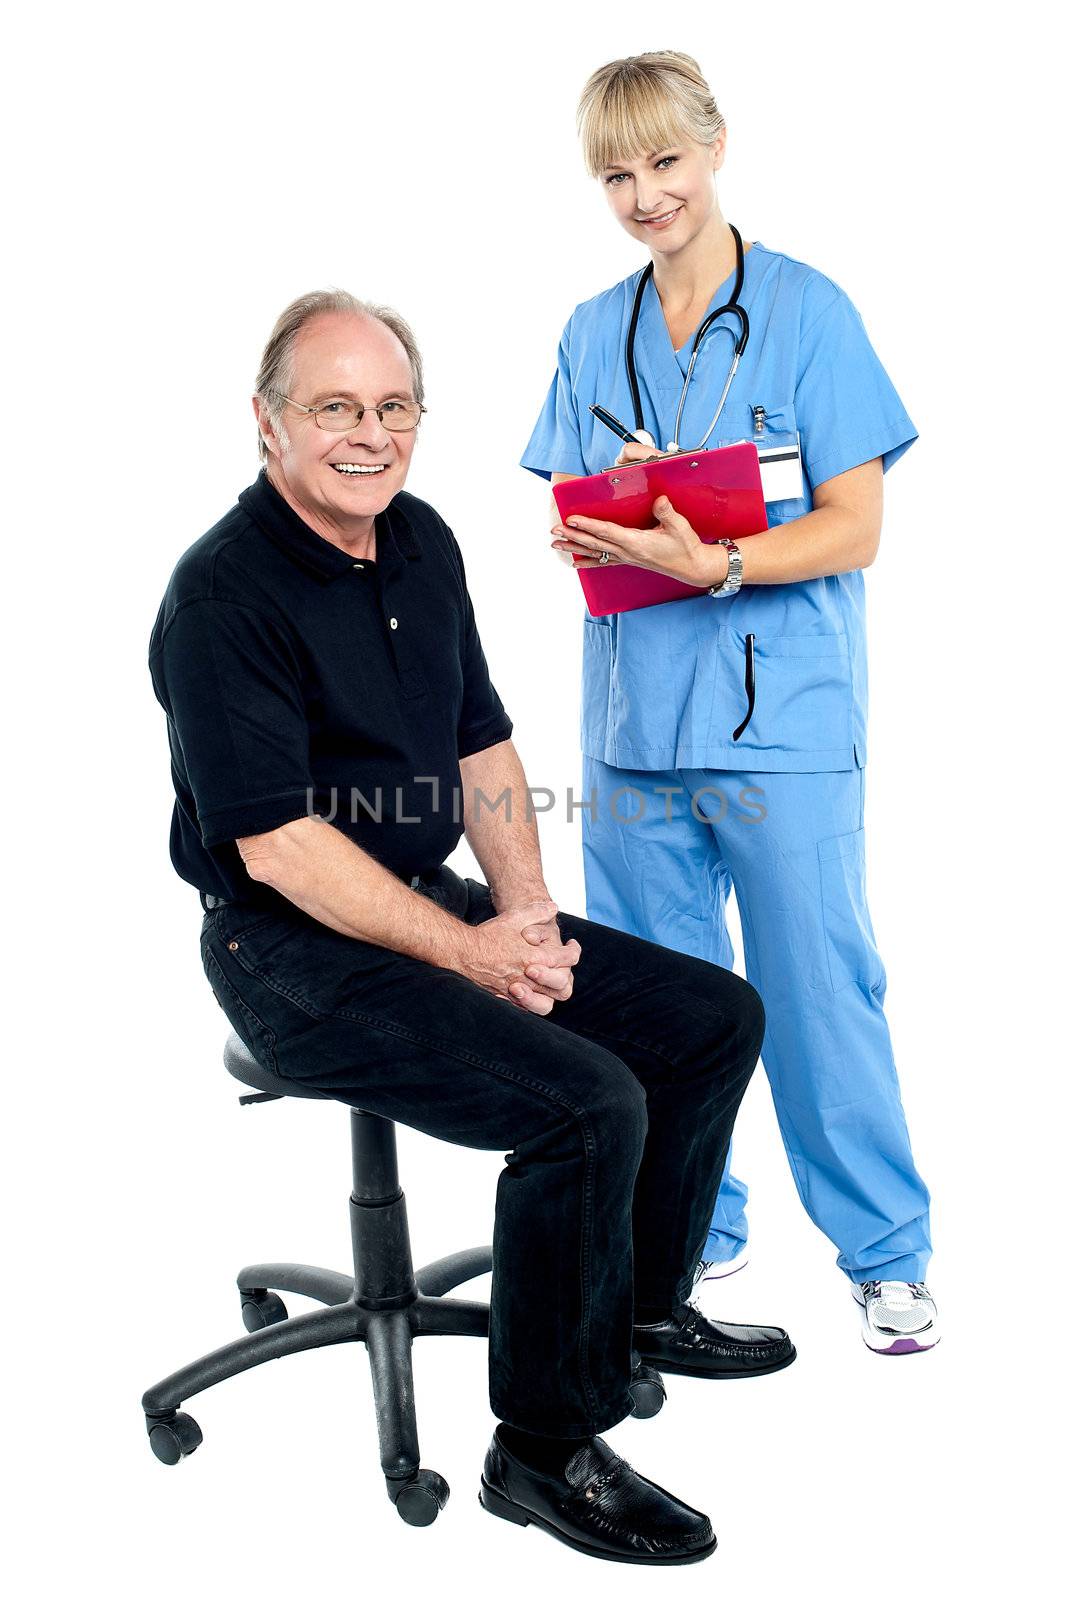 Pleasing doctor collecting patient's health history by stockyimages